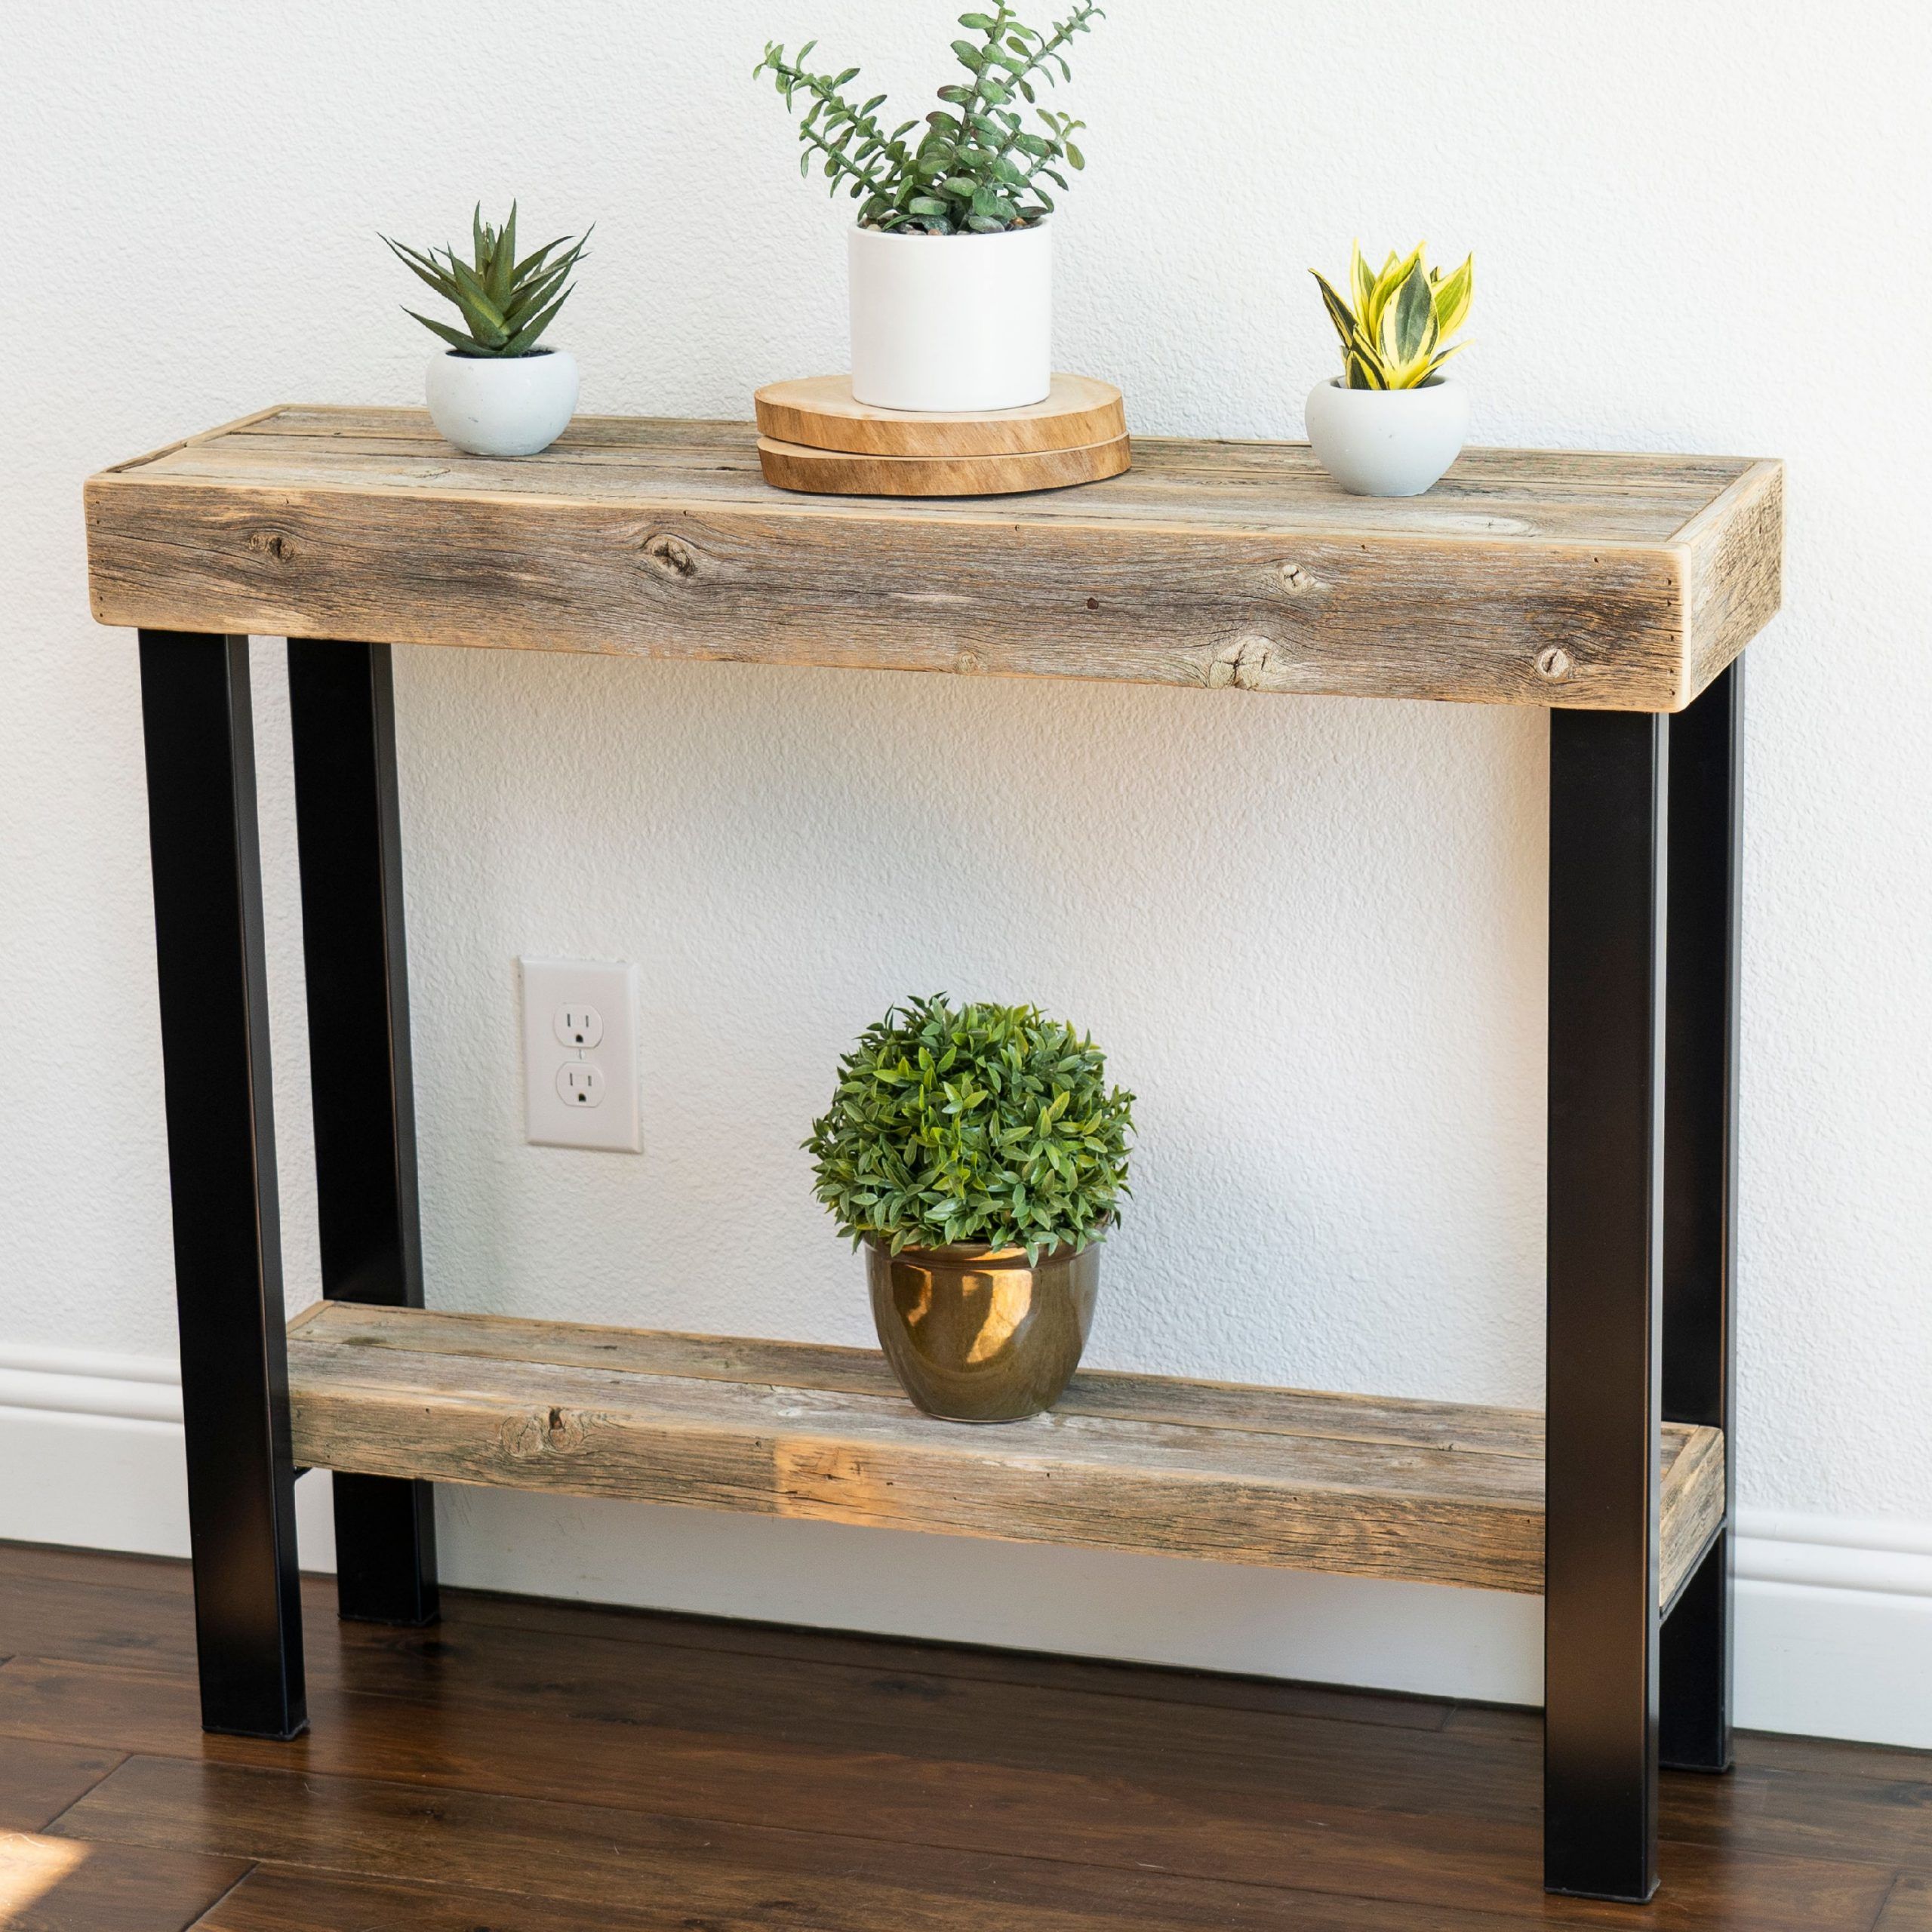 Roland Small Living Room Console Table, Reclaimed Wood W/ Black With Swan Black Console Tables (View 1 of 20)